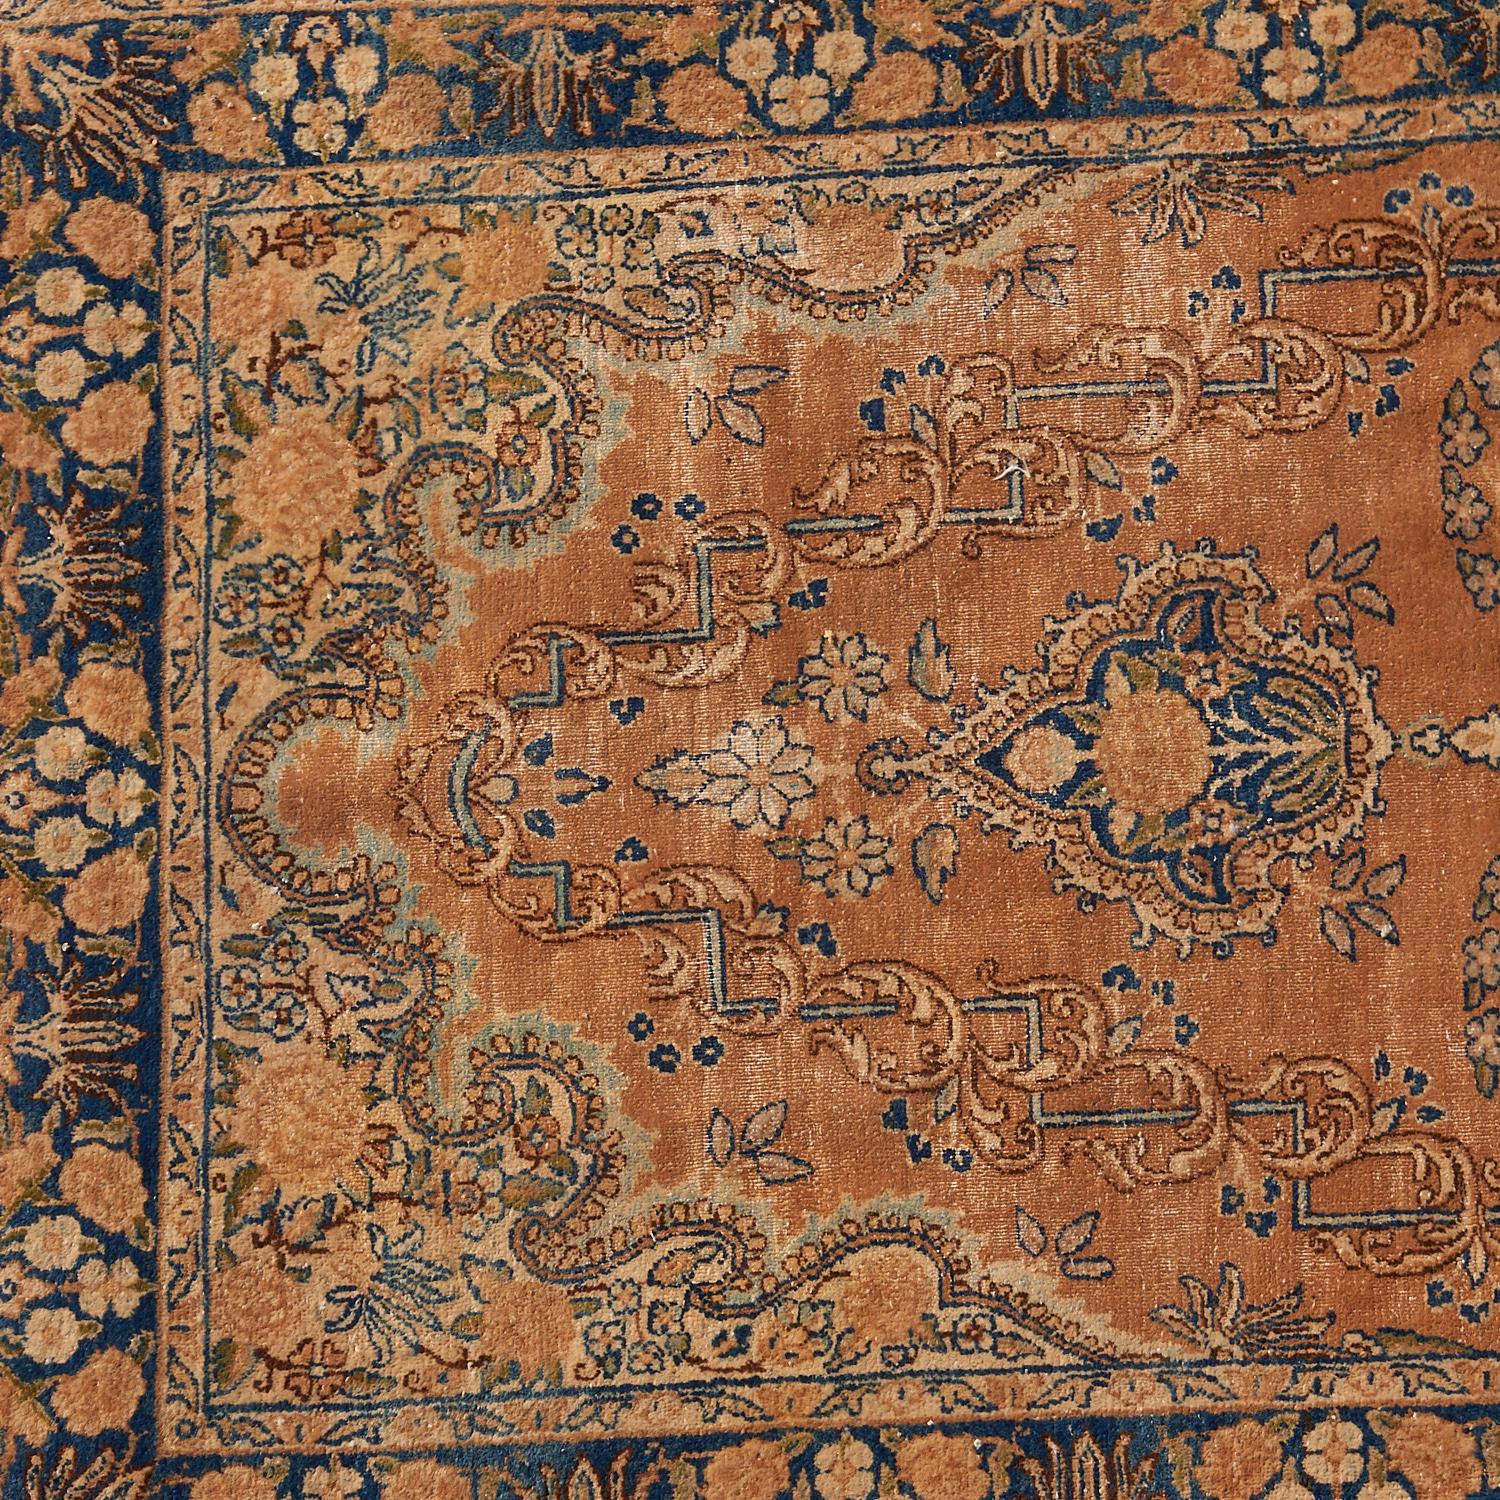 19th/20th c. Tabriz-style rug, finely woven, low pile wool-silk blend in nature inspired tones, central lozenge-shaped medallion, dark blue border.

The color palette is a very attractive feature of this Persian antique Tabriz carpet The expertly